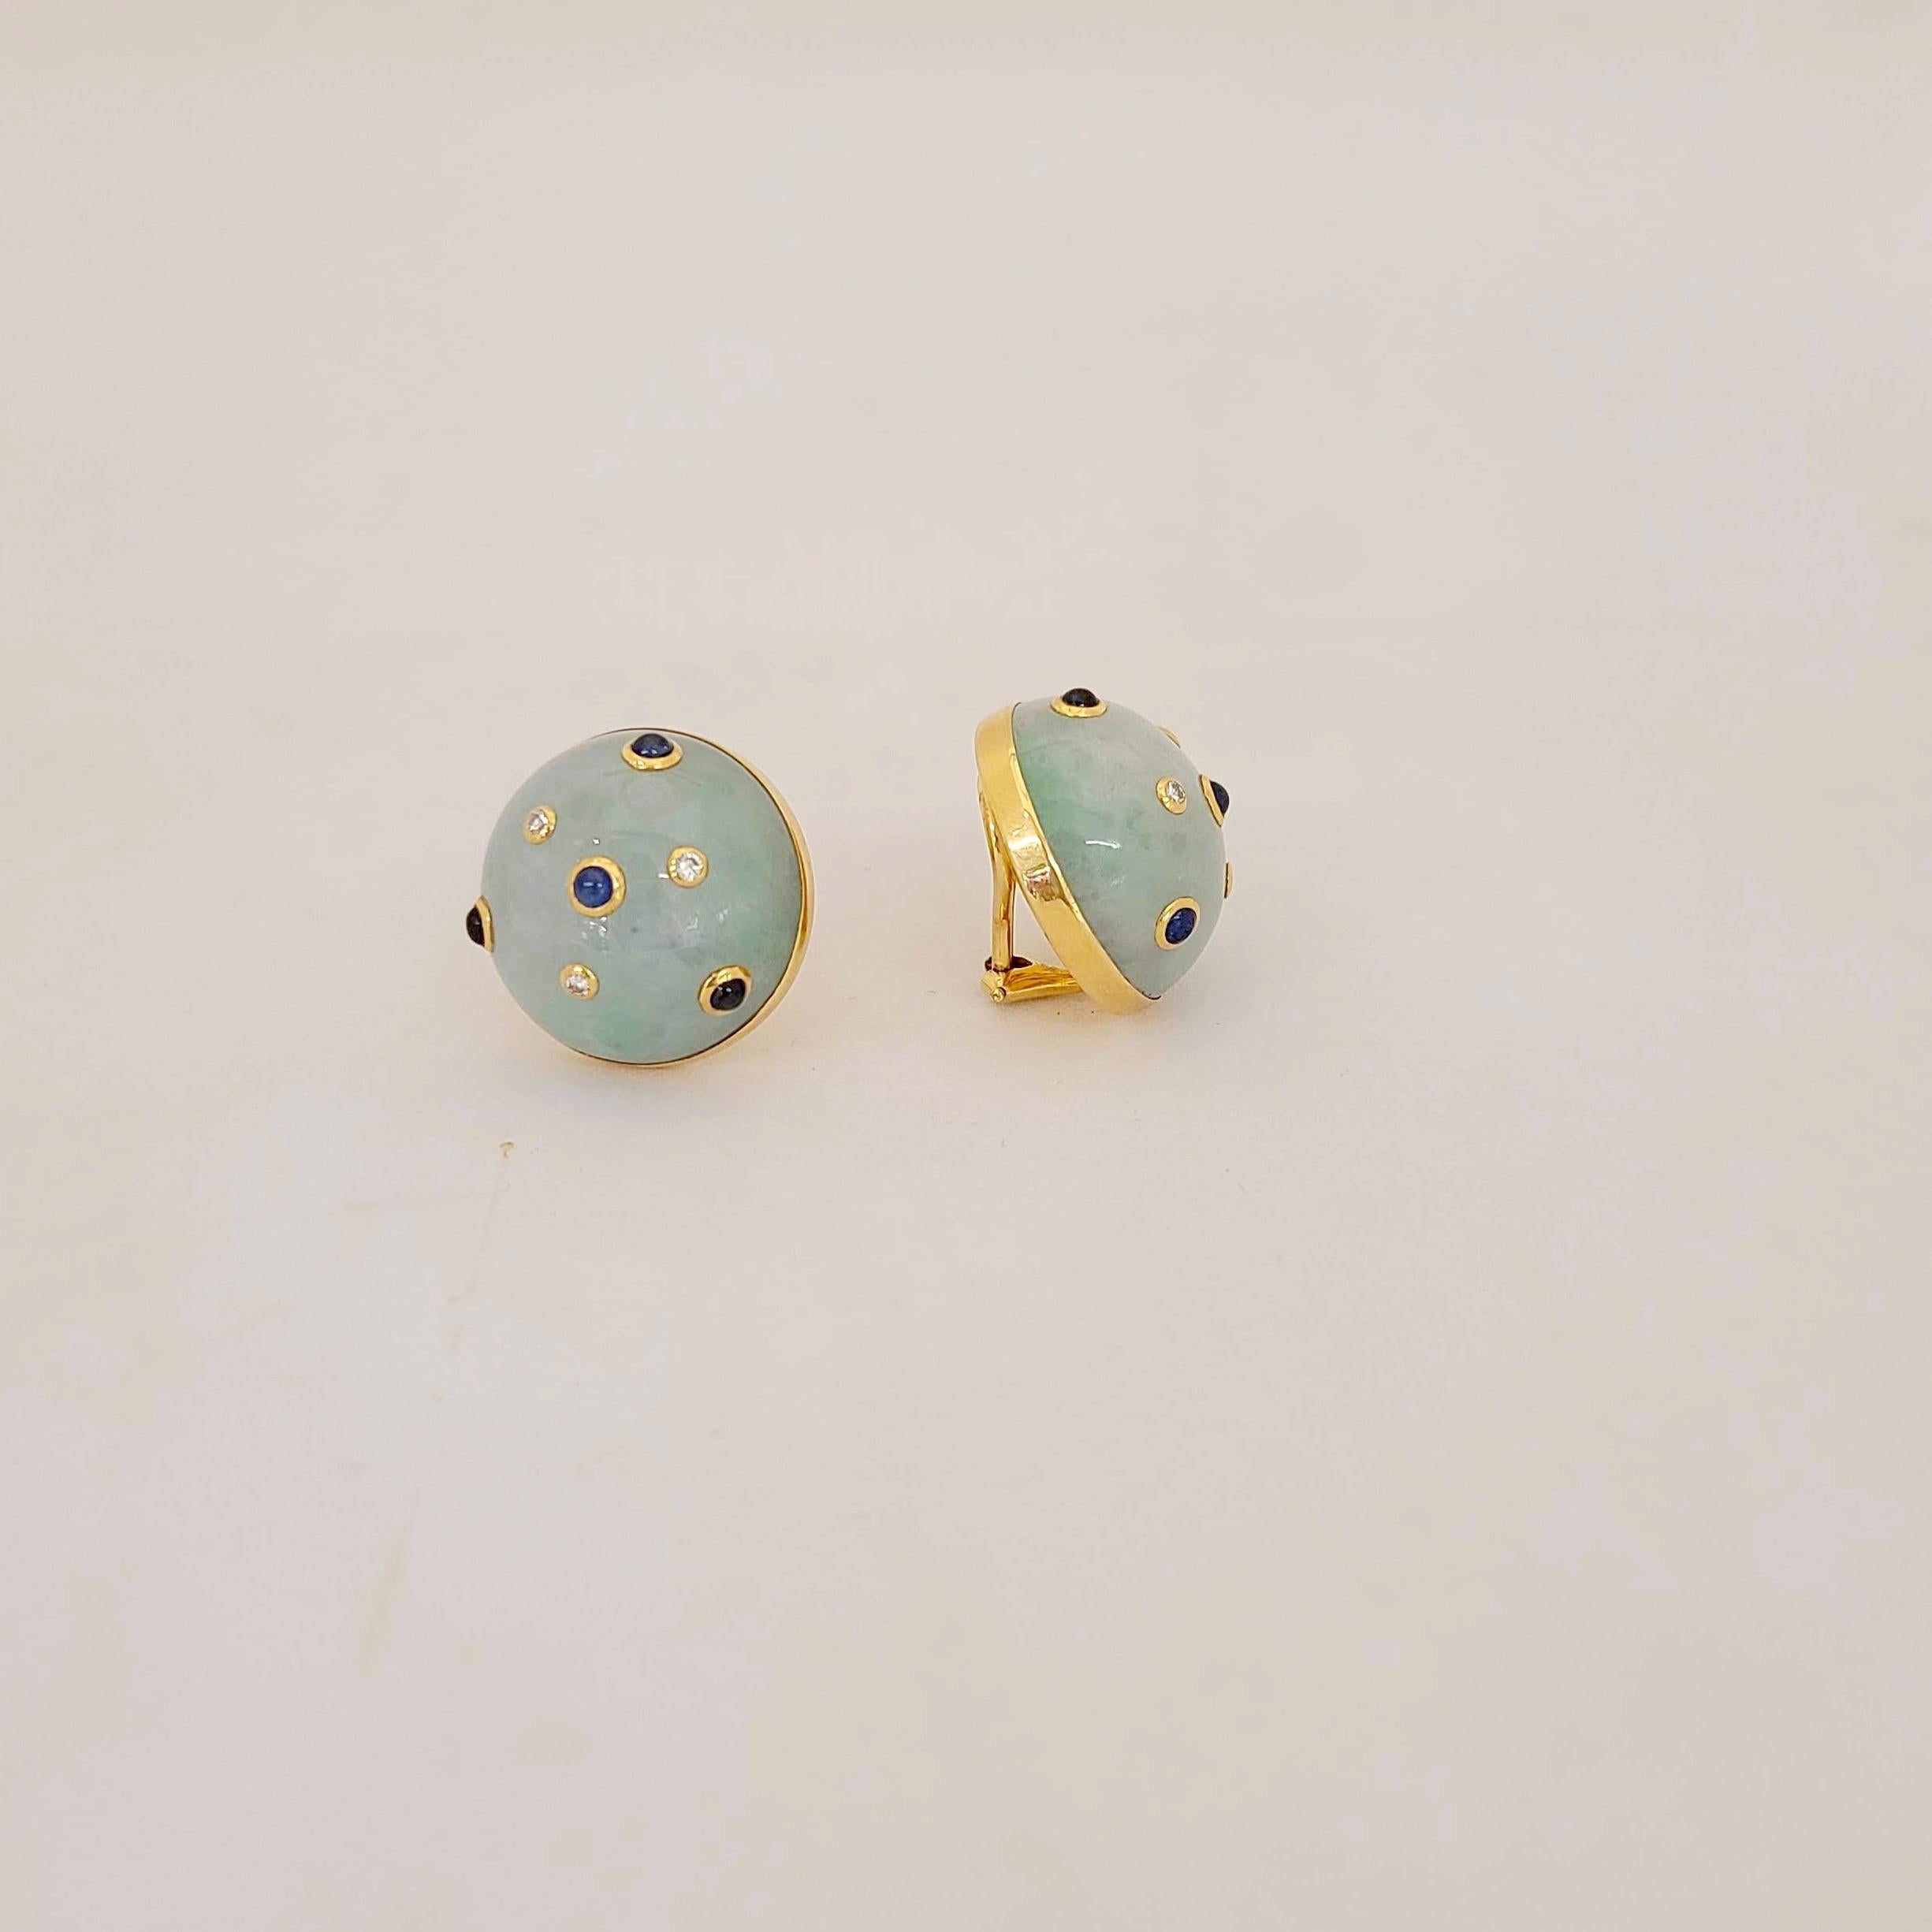 Lovely button earring designed with jadite which is a milky light greenish teal stone. Bezel set blue sapphire cabochons and diamonds have been sprinkled throughout. The earrings are clip on, but posts can be added. Diameter 3/4